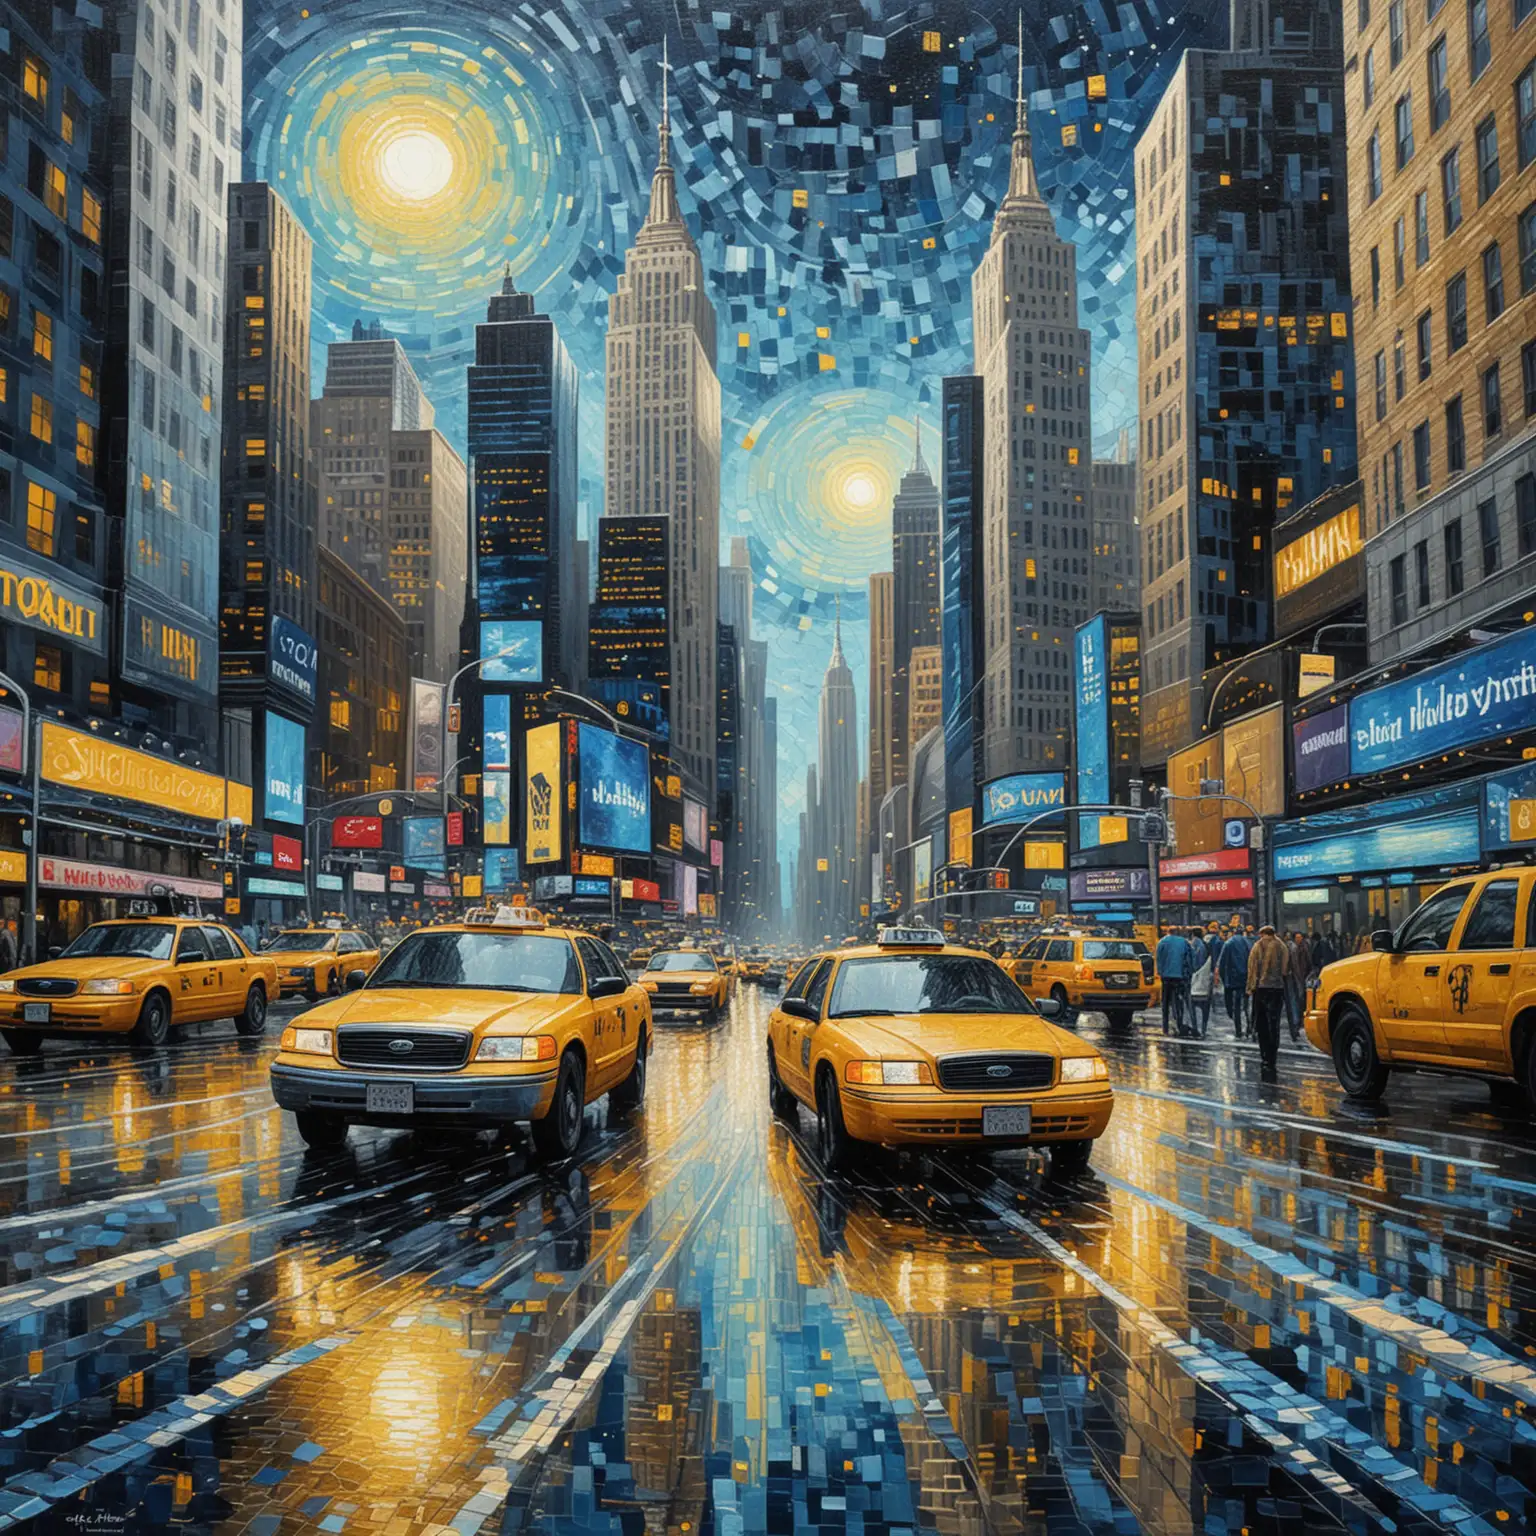 New York Cityscape Van GoghInspired Mosaic with Time Square and Yellow Cabs